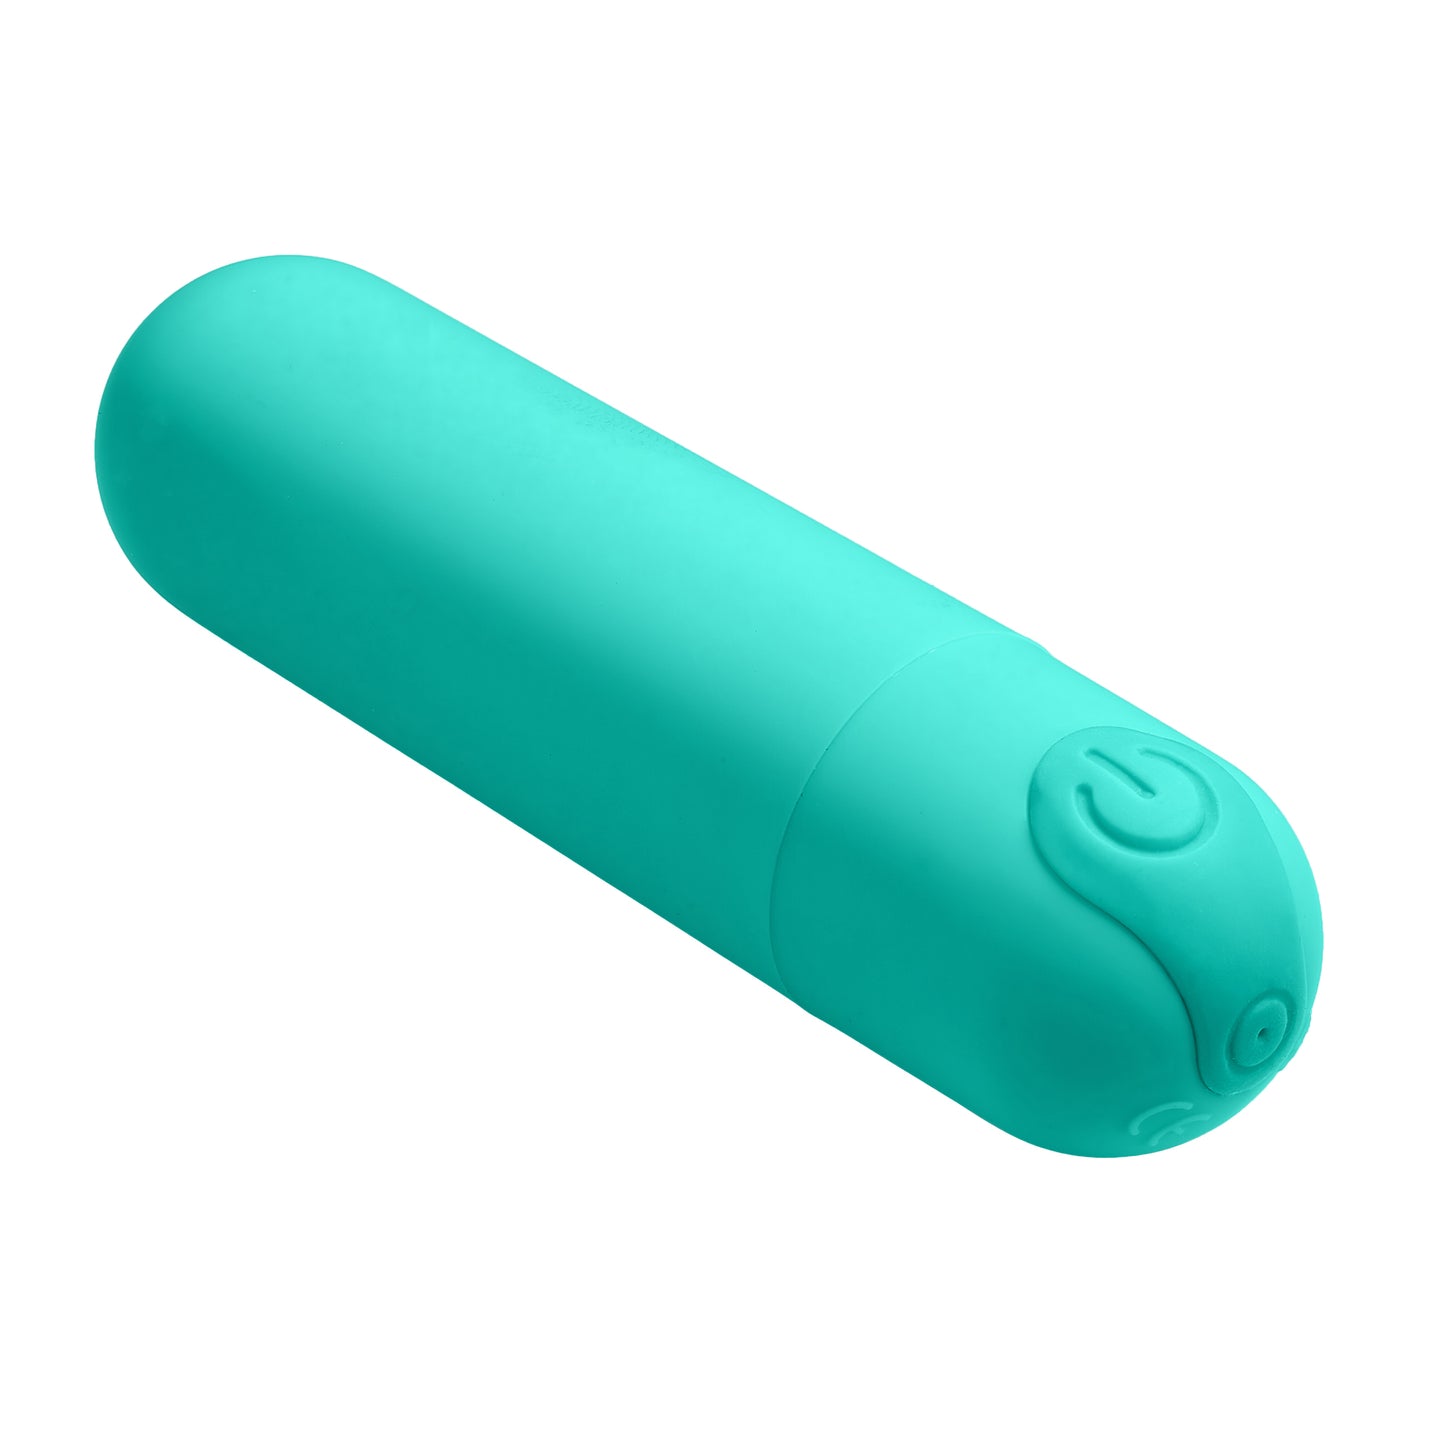 Cloud 9 Power Touch Iii - Mini Rechargeable Bullet